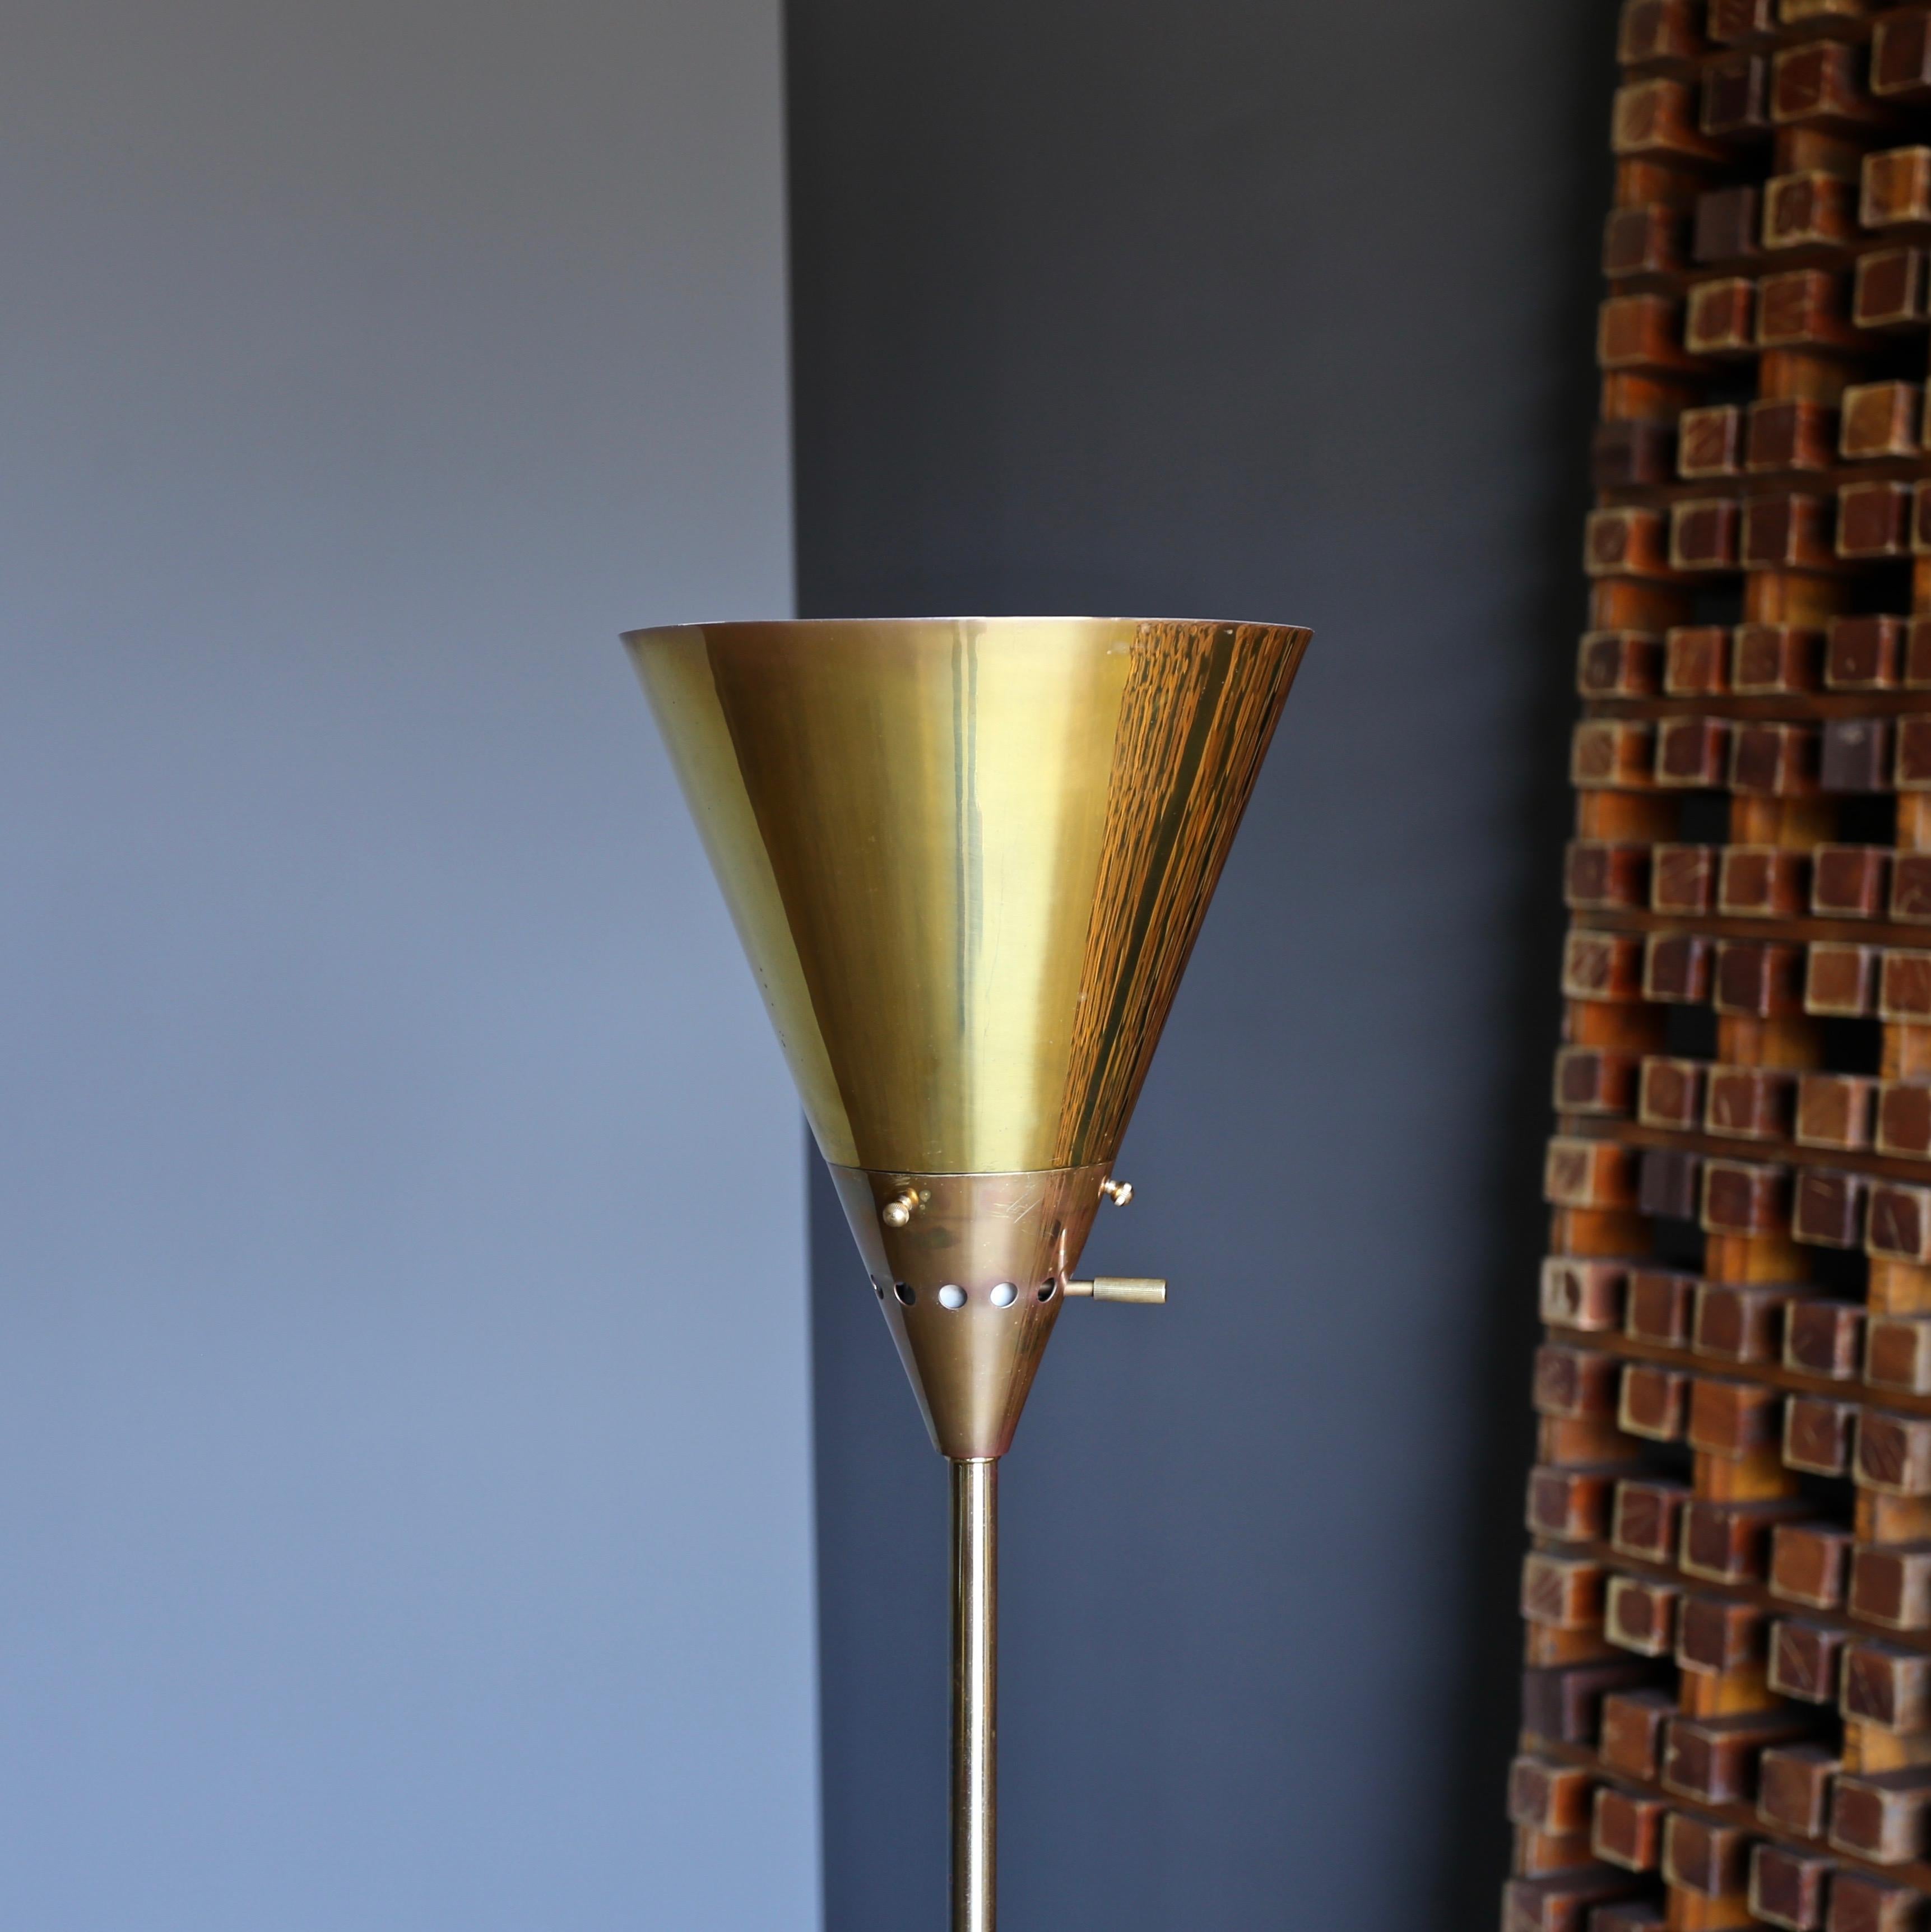 Early production circa 1945 “Baldry” indirect floor lamp (model 13), designed by Harry Weese. Substantial solid brass construction with iron base. Harry Weese designed products were sold through the ground breaking modern design retailer in Chicago,